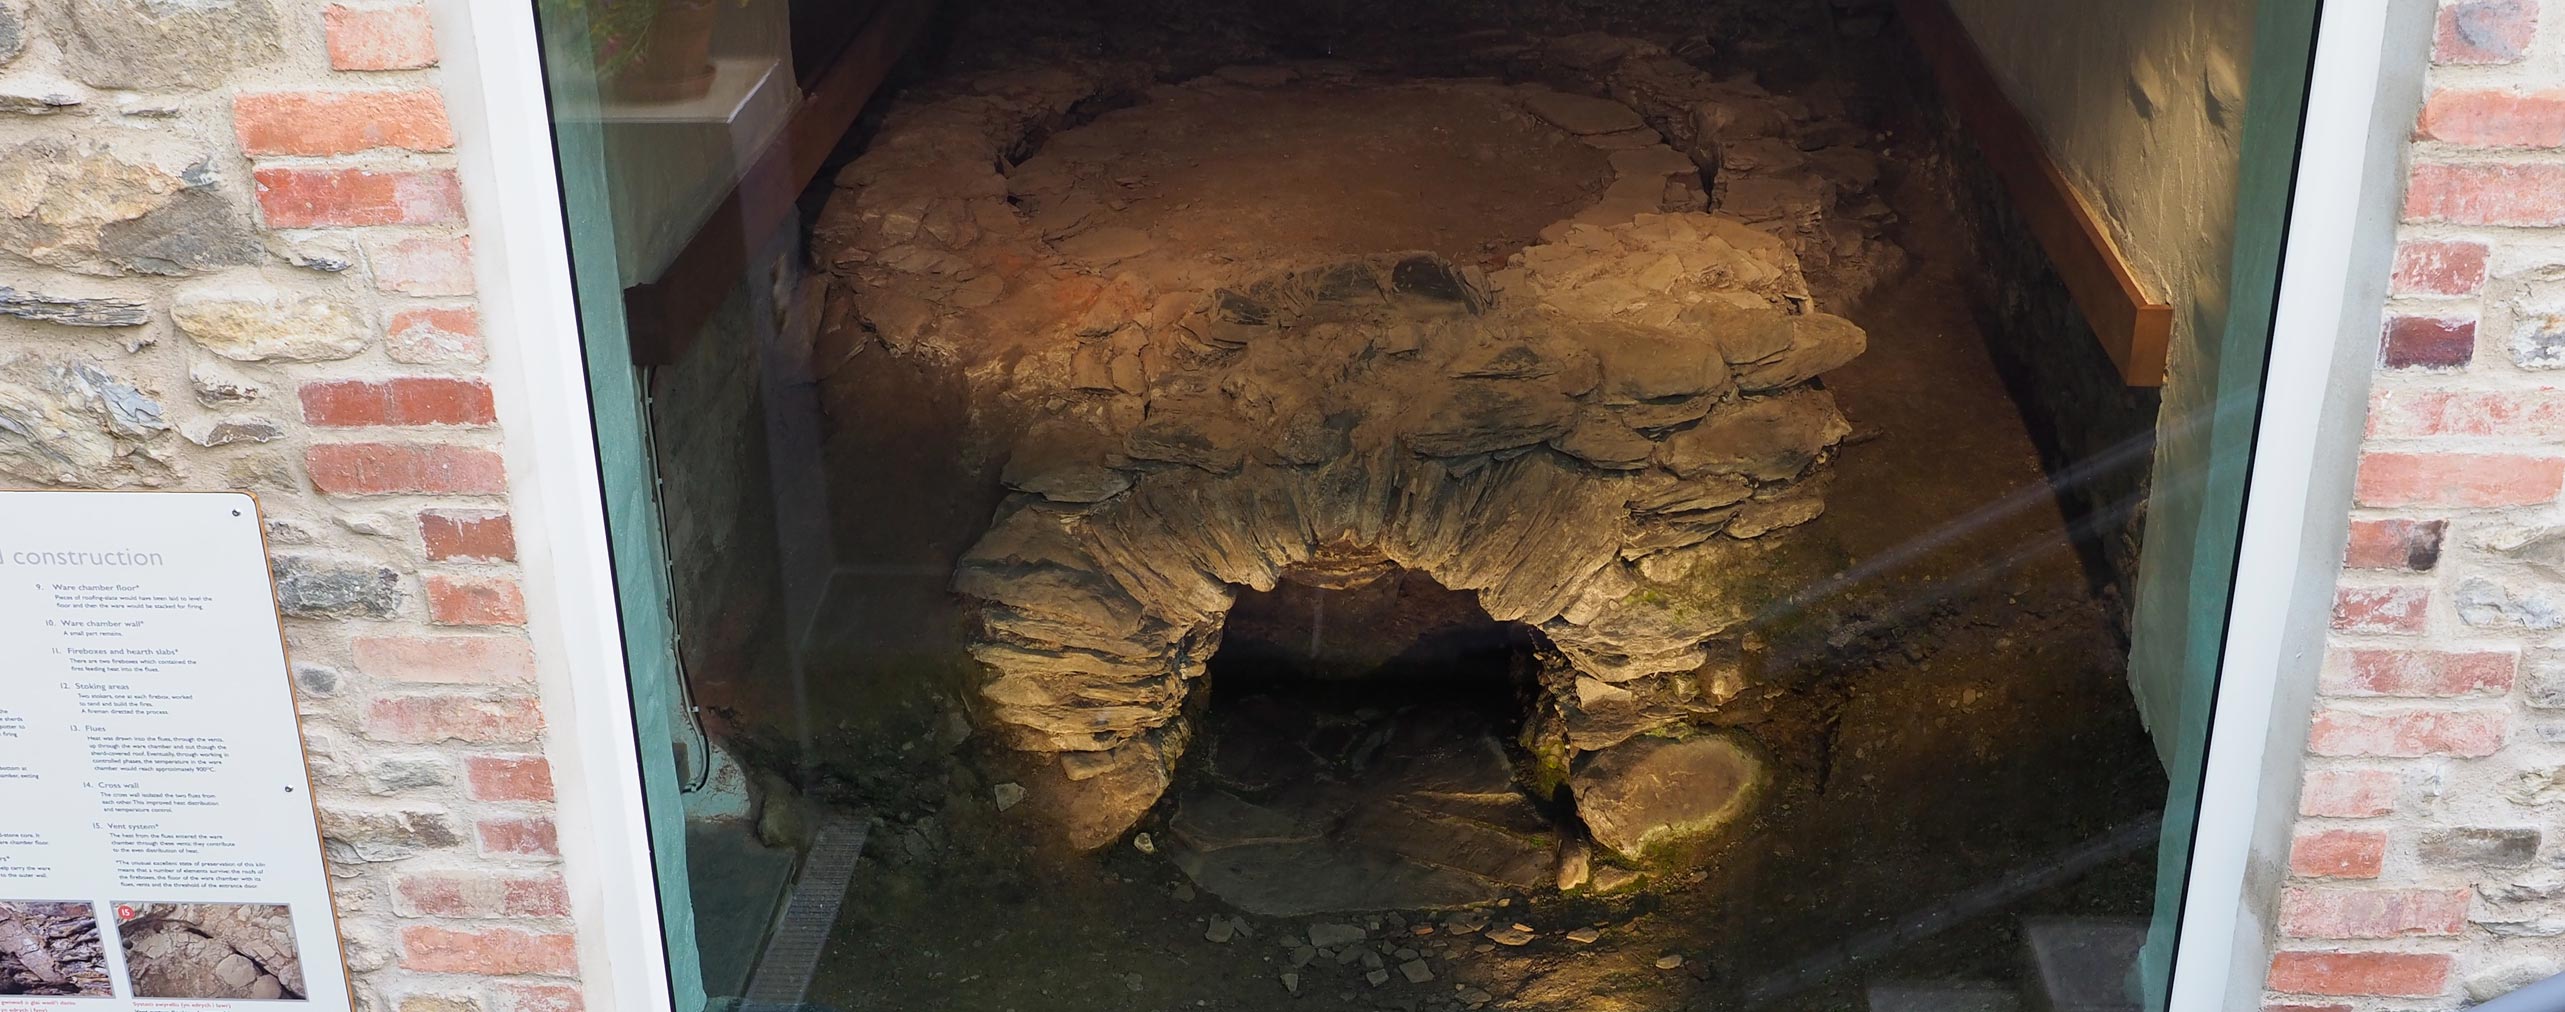 The Medieval Kiln under the Memorial Hall